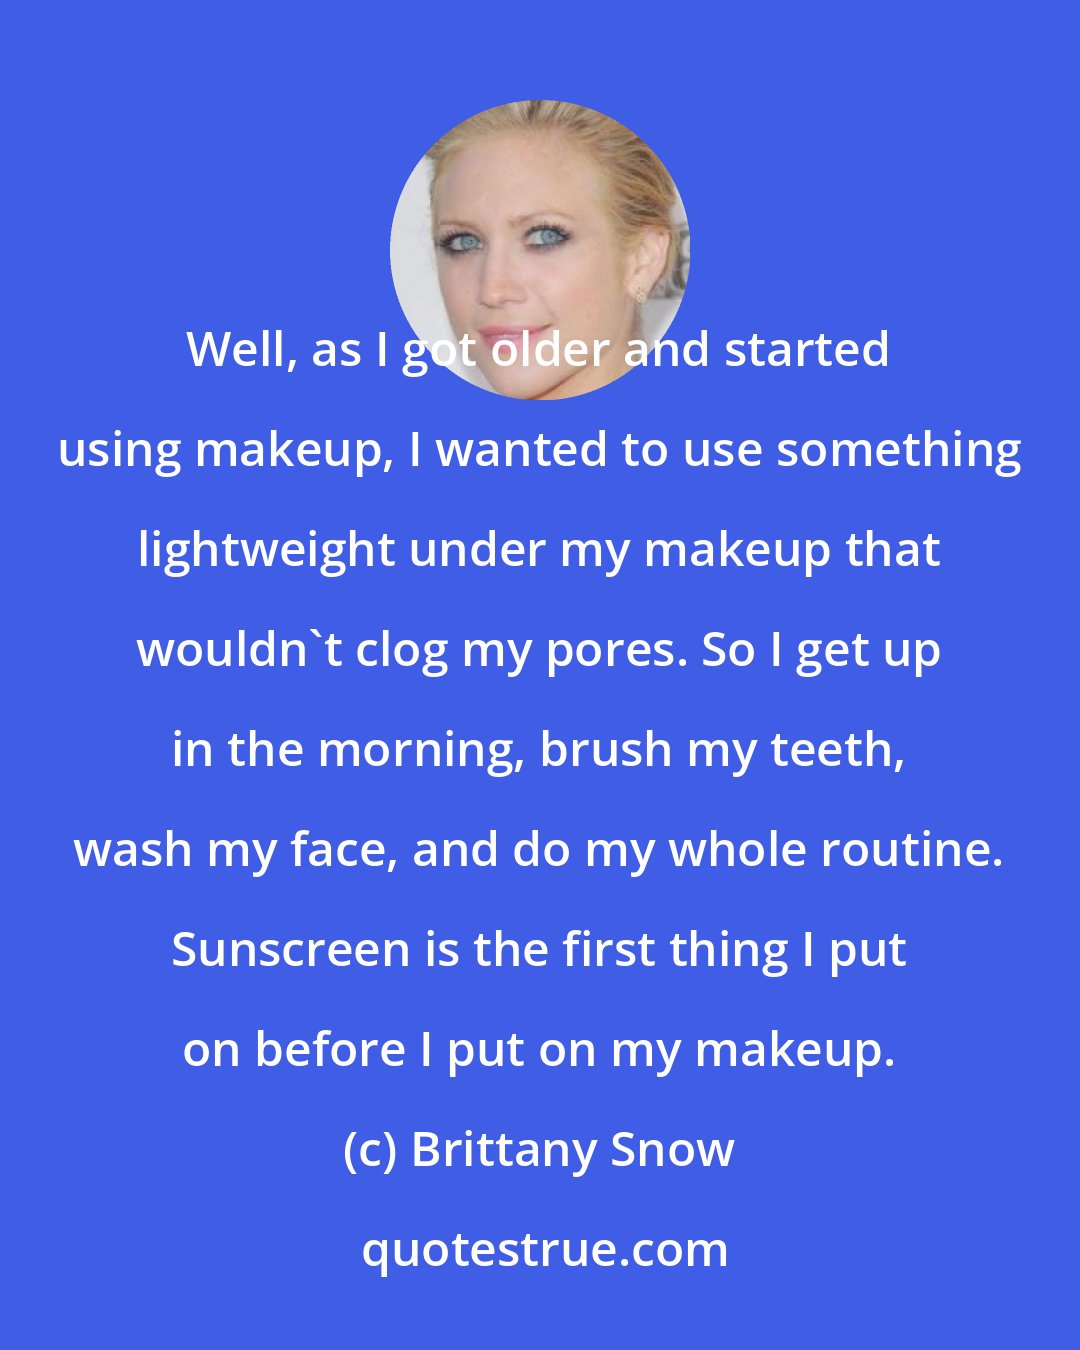 Brittany Snow: Well, as I got older and started using makeup, I wanted to use something lightweight under my makeup that wouldn't clog my pores. So I get up in the morning, brush my teeth, wash my face, and do my whole routine. Sunscreen is the first thing I put on before I put on my makeup.